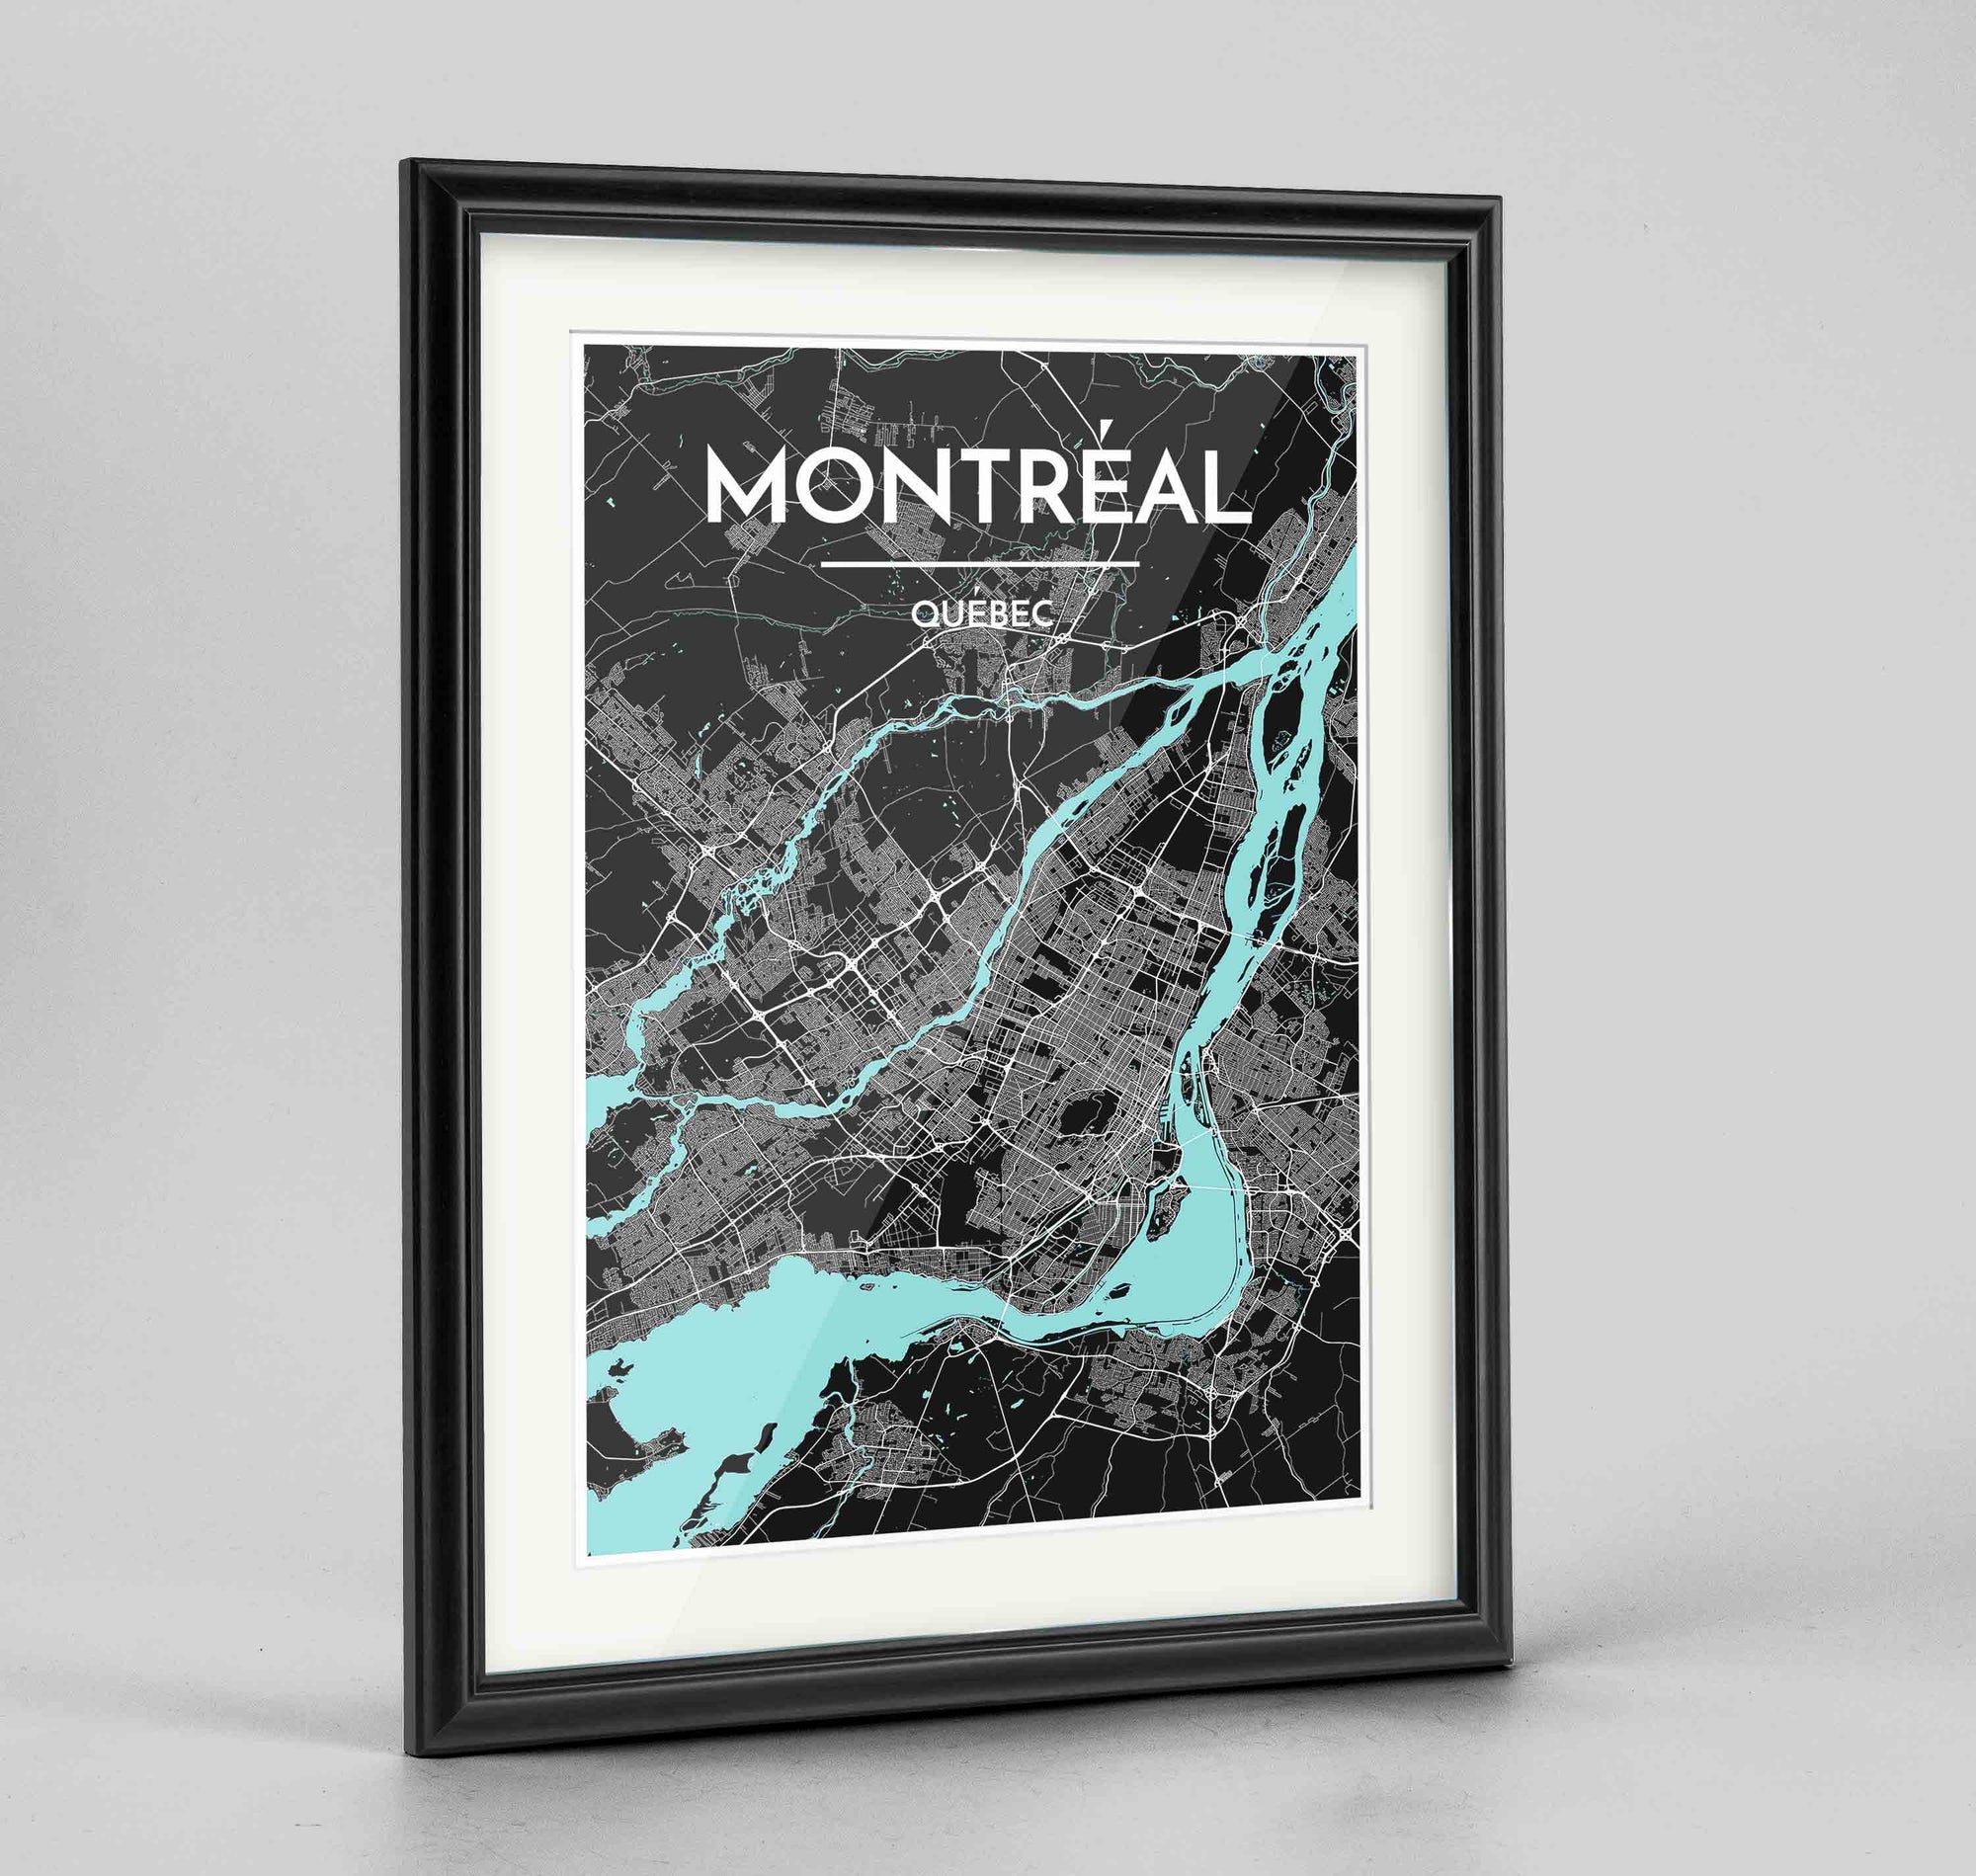 Framed Montreal City Map 24x36" Traditional Black frame Point Two Design Group